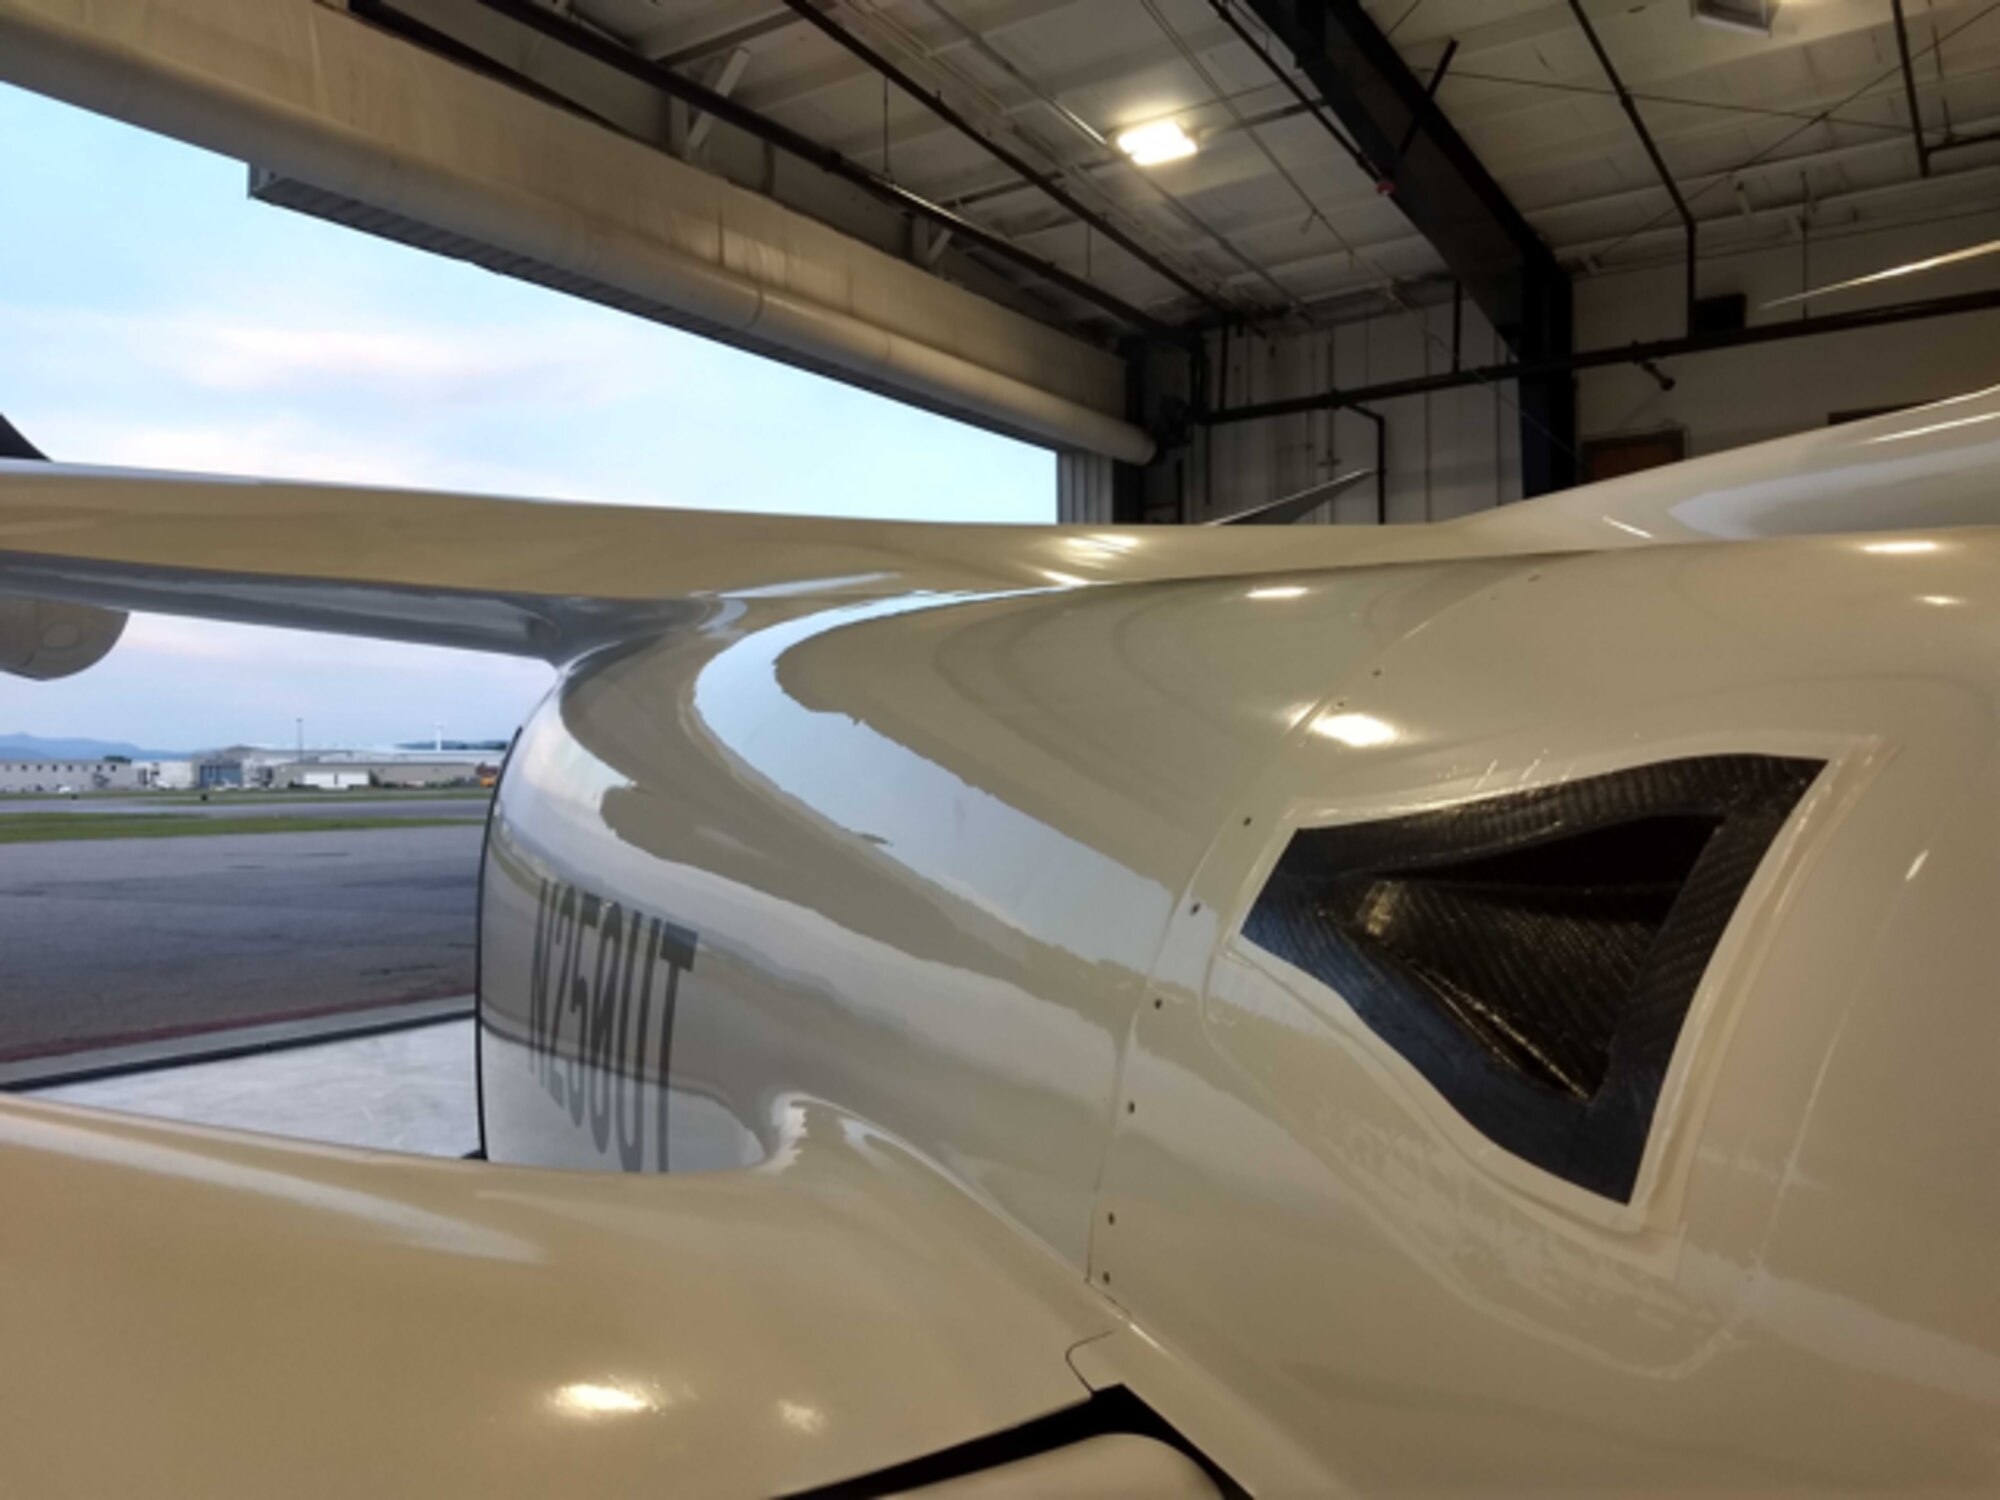 The Beta Technologies ALIA uses four fixed propellers mounted above the fuselage and one dedicated pusher propeller.  (Image courtesy of Beta Technologies)